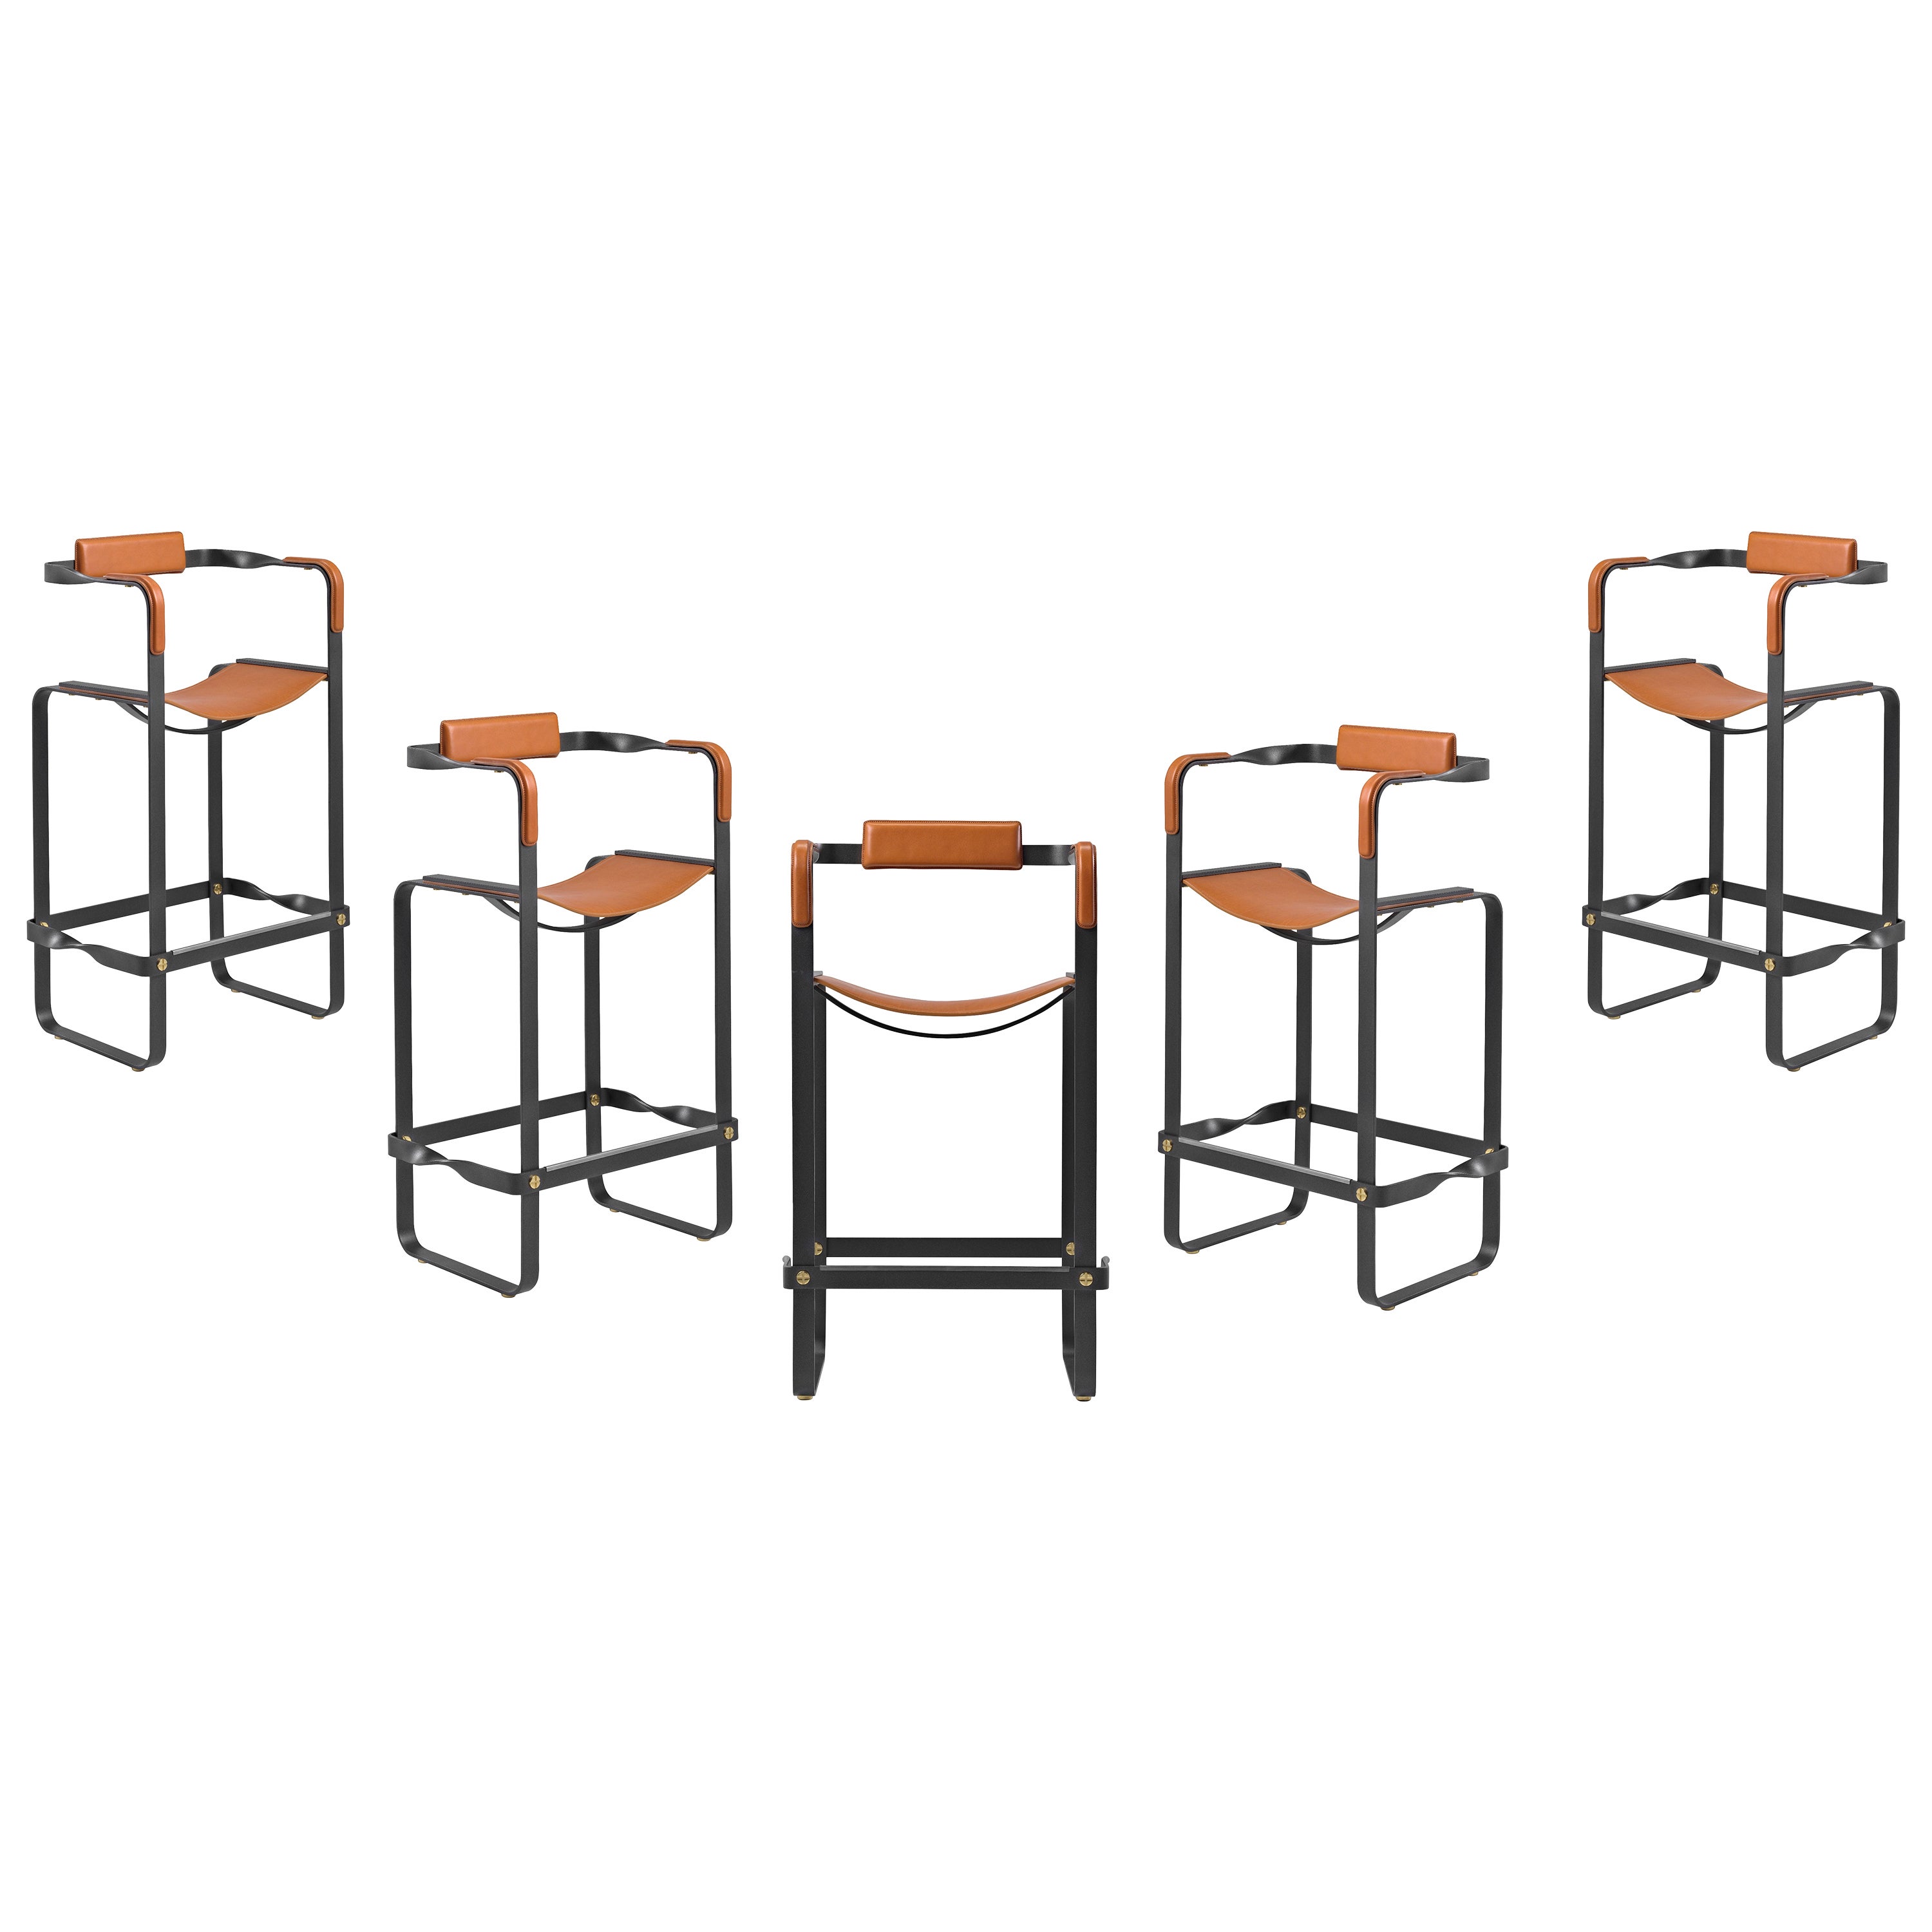 Set of 5 Classic Contemporary Bar Stool w. Backrest Nuit Noir & Tobacco Leather